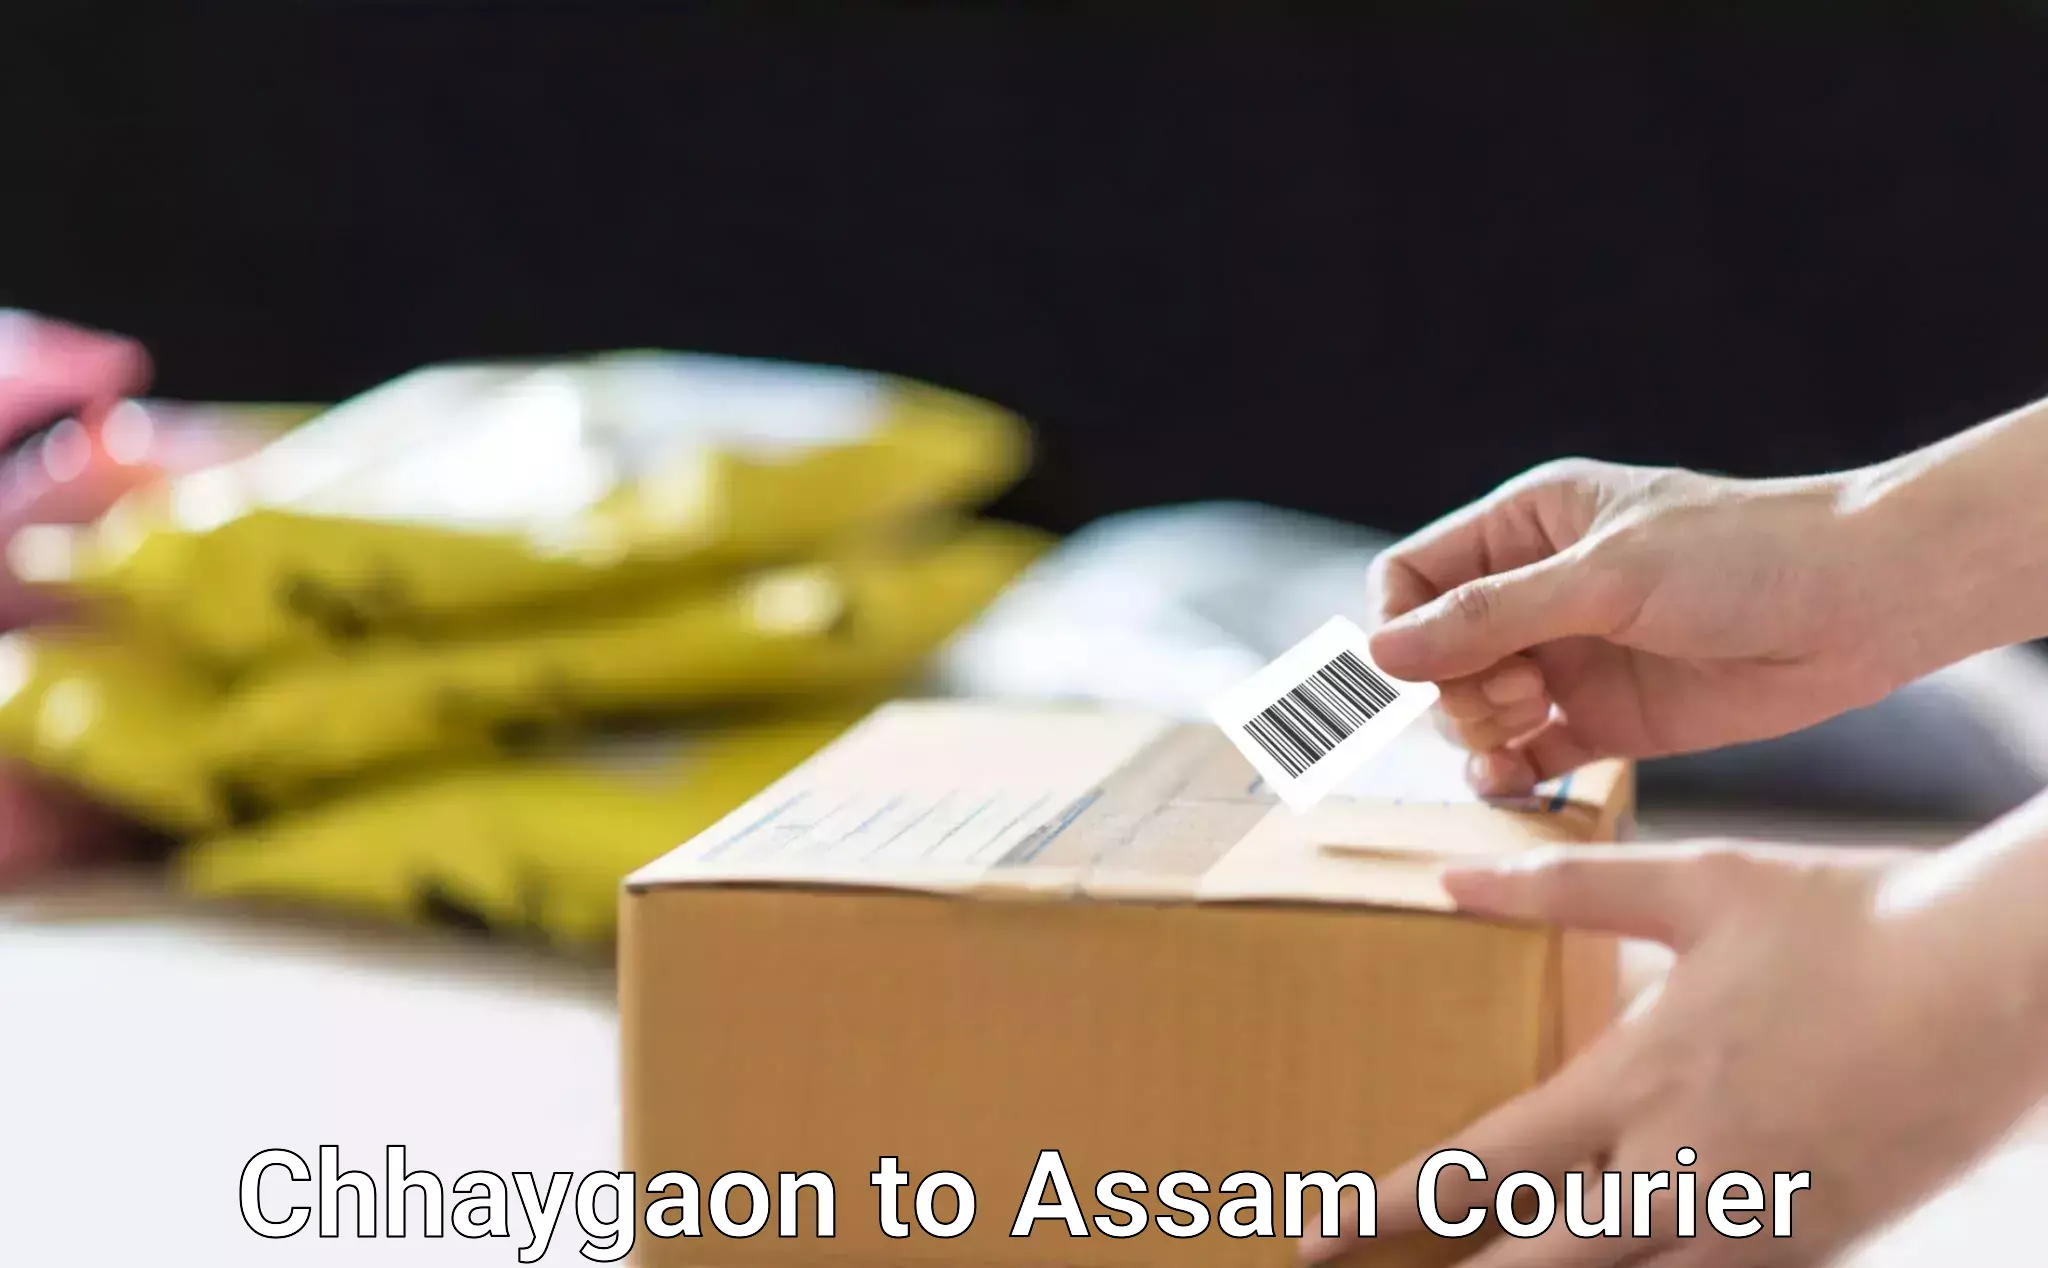 24/7 courier service Chhaygaon to Assam